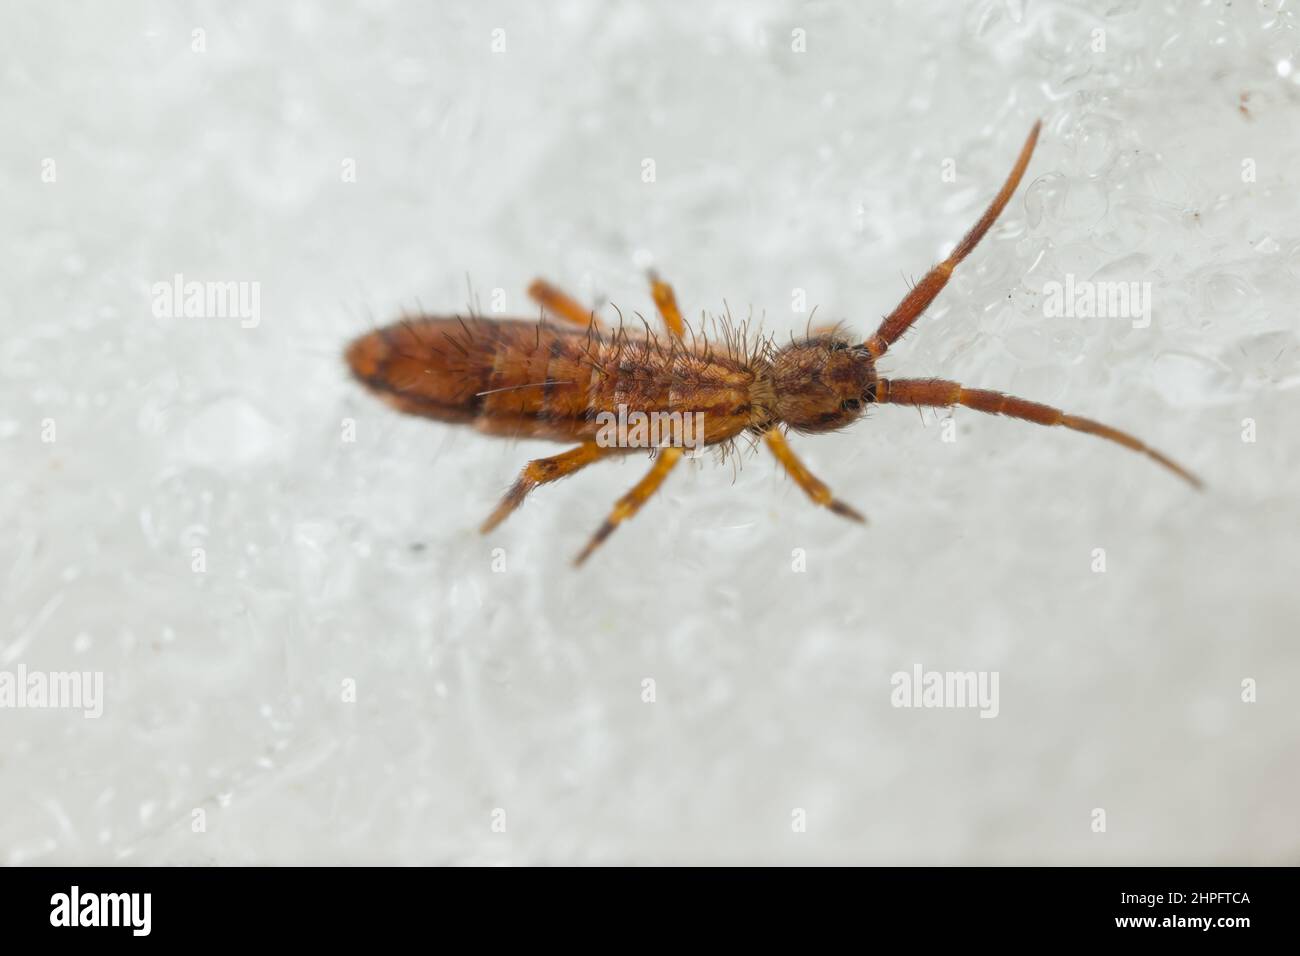 Slender springtail (Orchesella flavescens) walking on ice Stock Photo